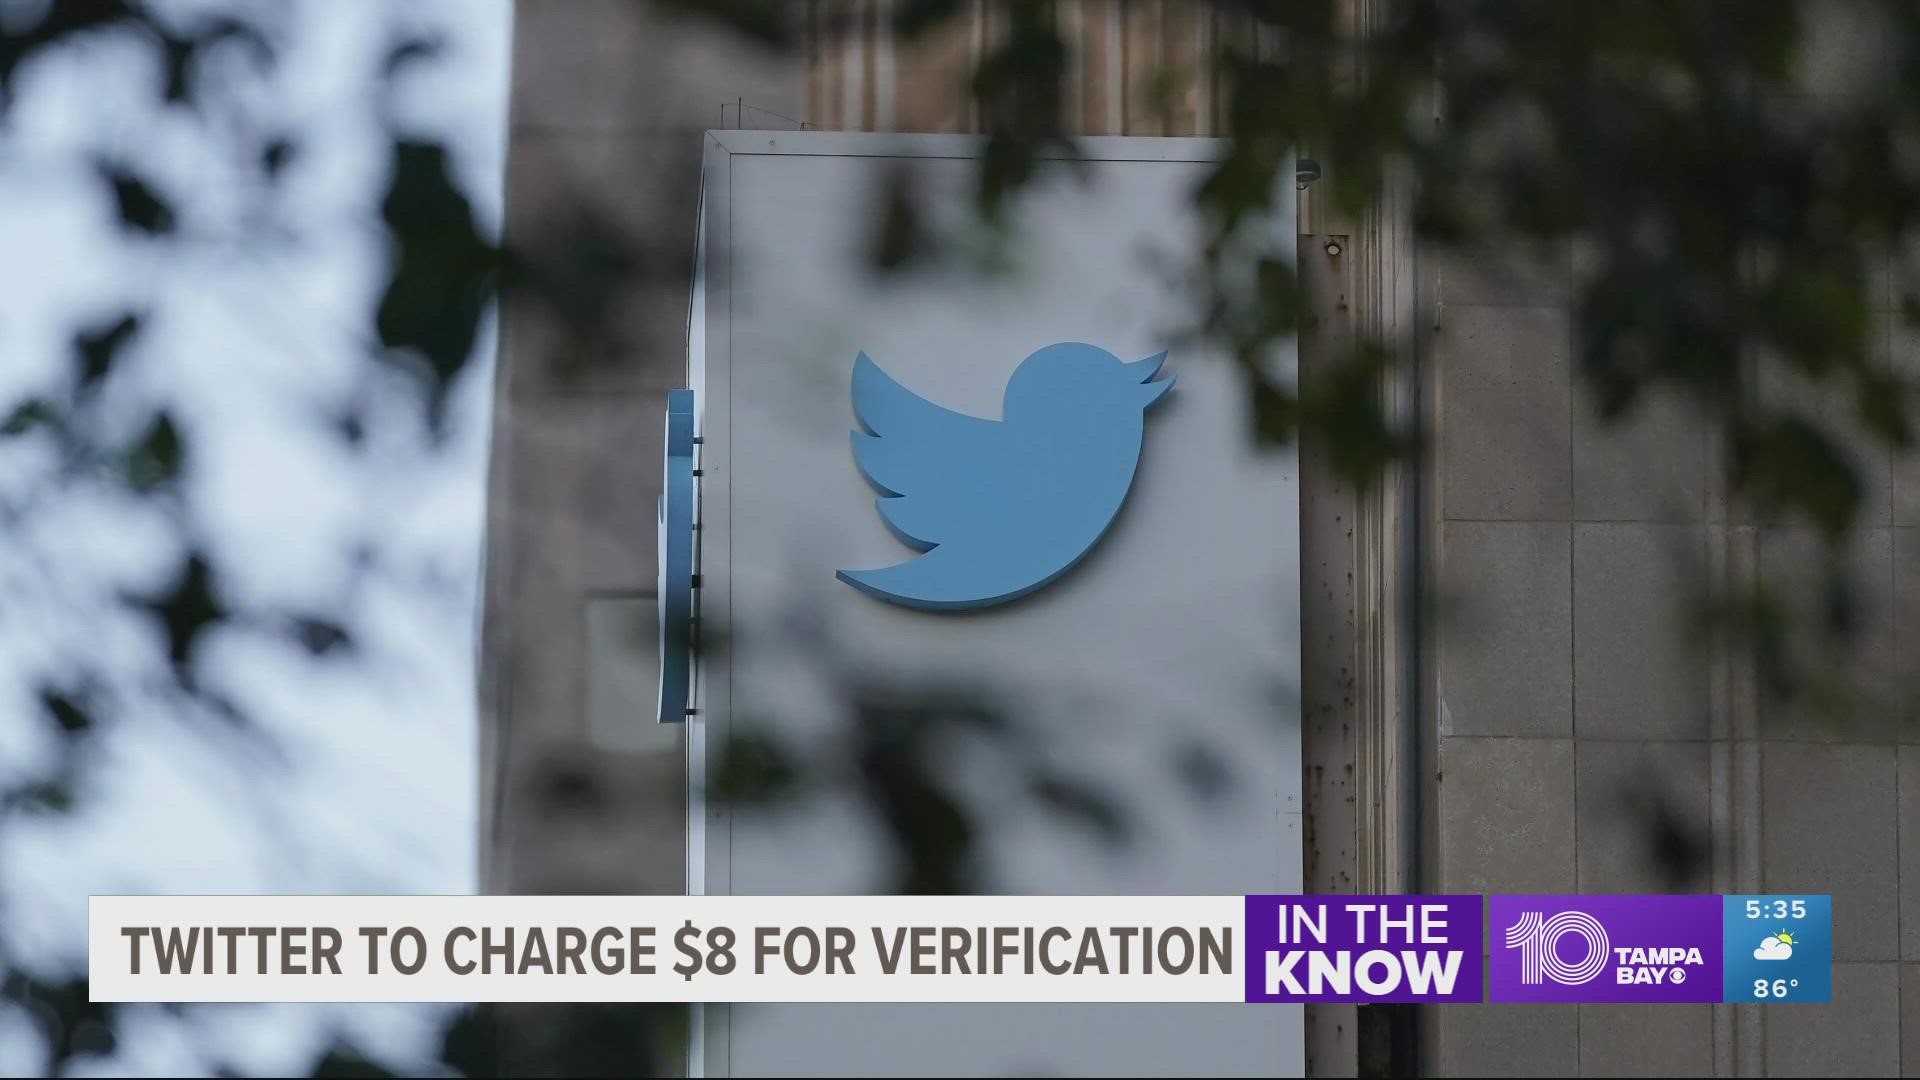 Twitter has historically used the blue check mark to verify higher-profile accounts, including Musk’s, so that other users know it’s really them.